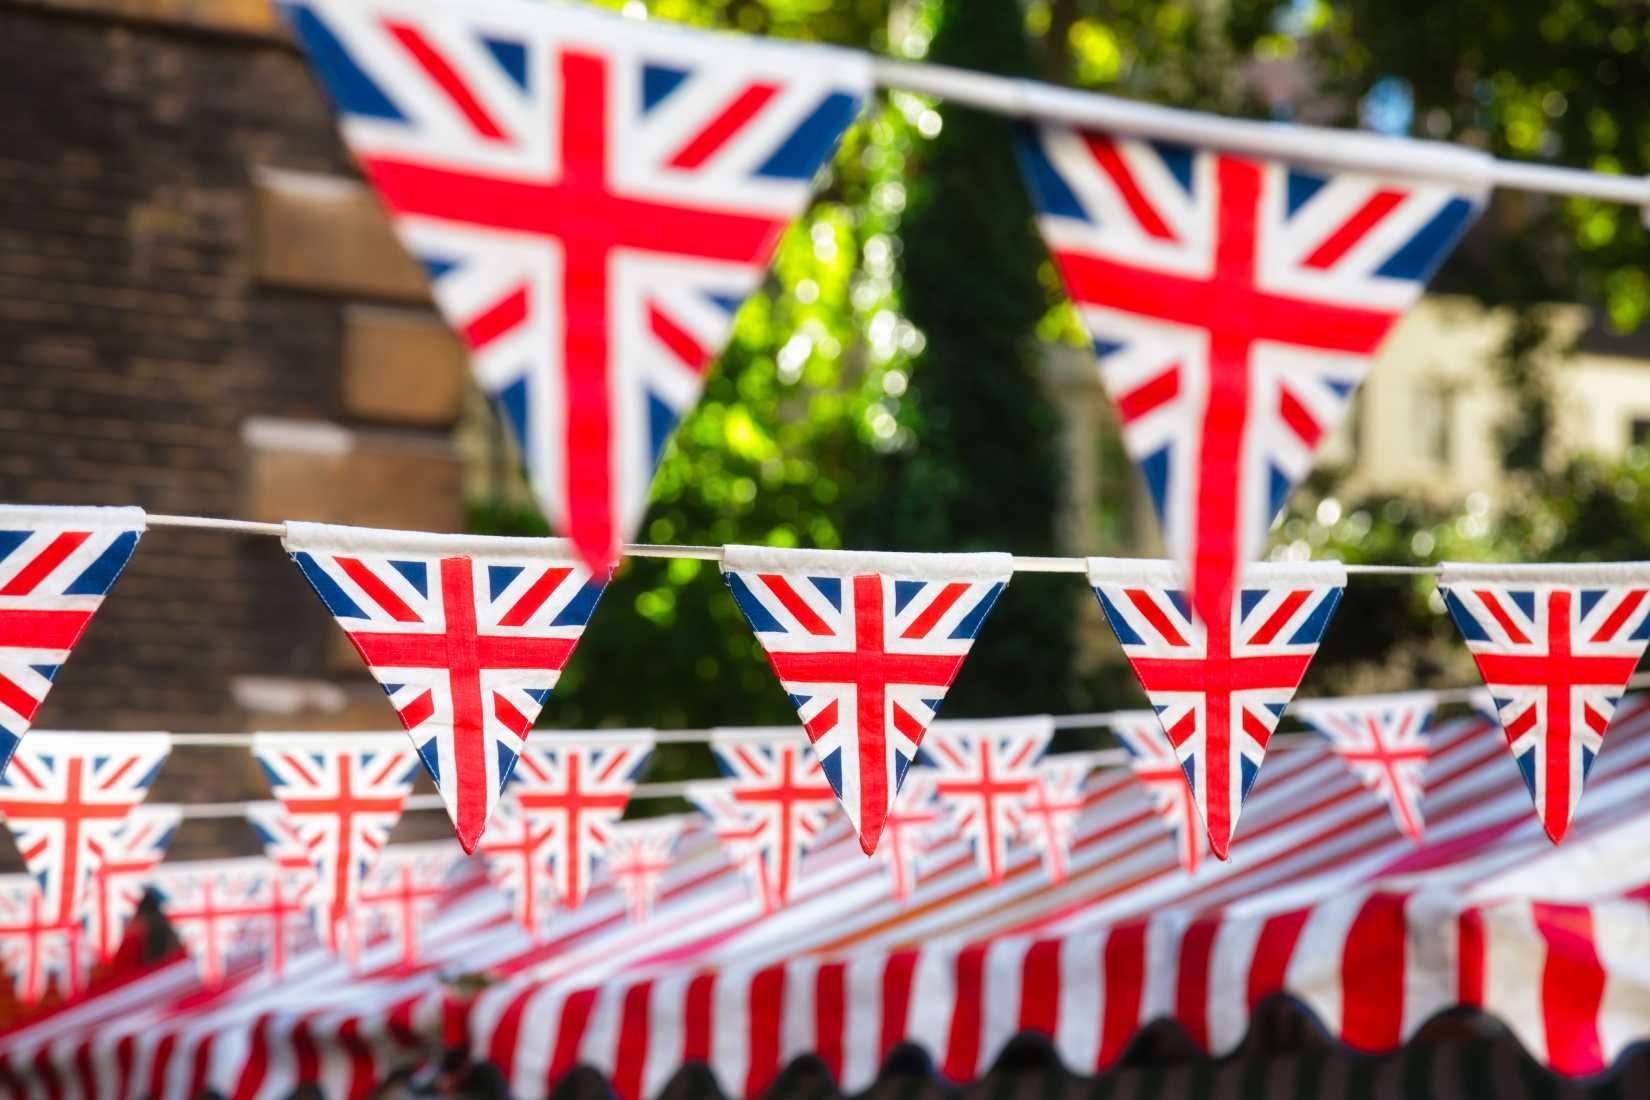 Decor for a Jubilee street party or garden party